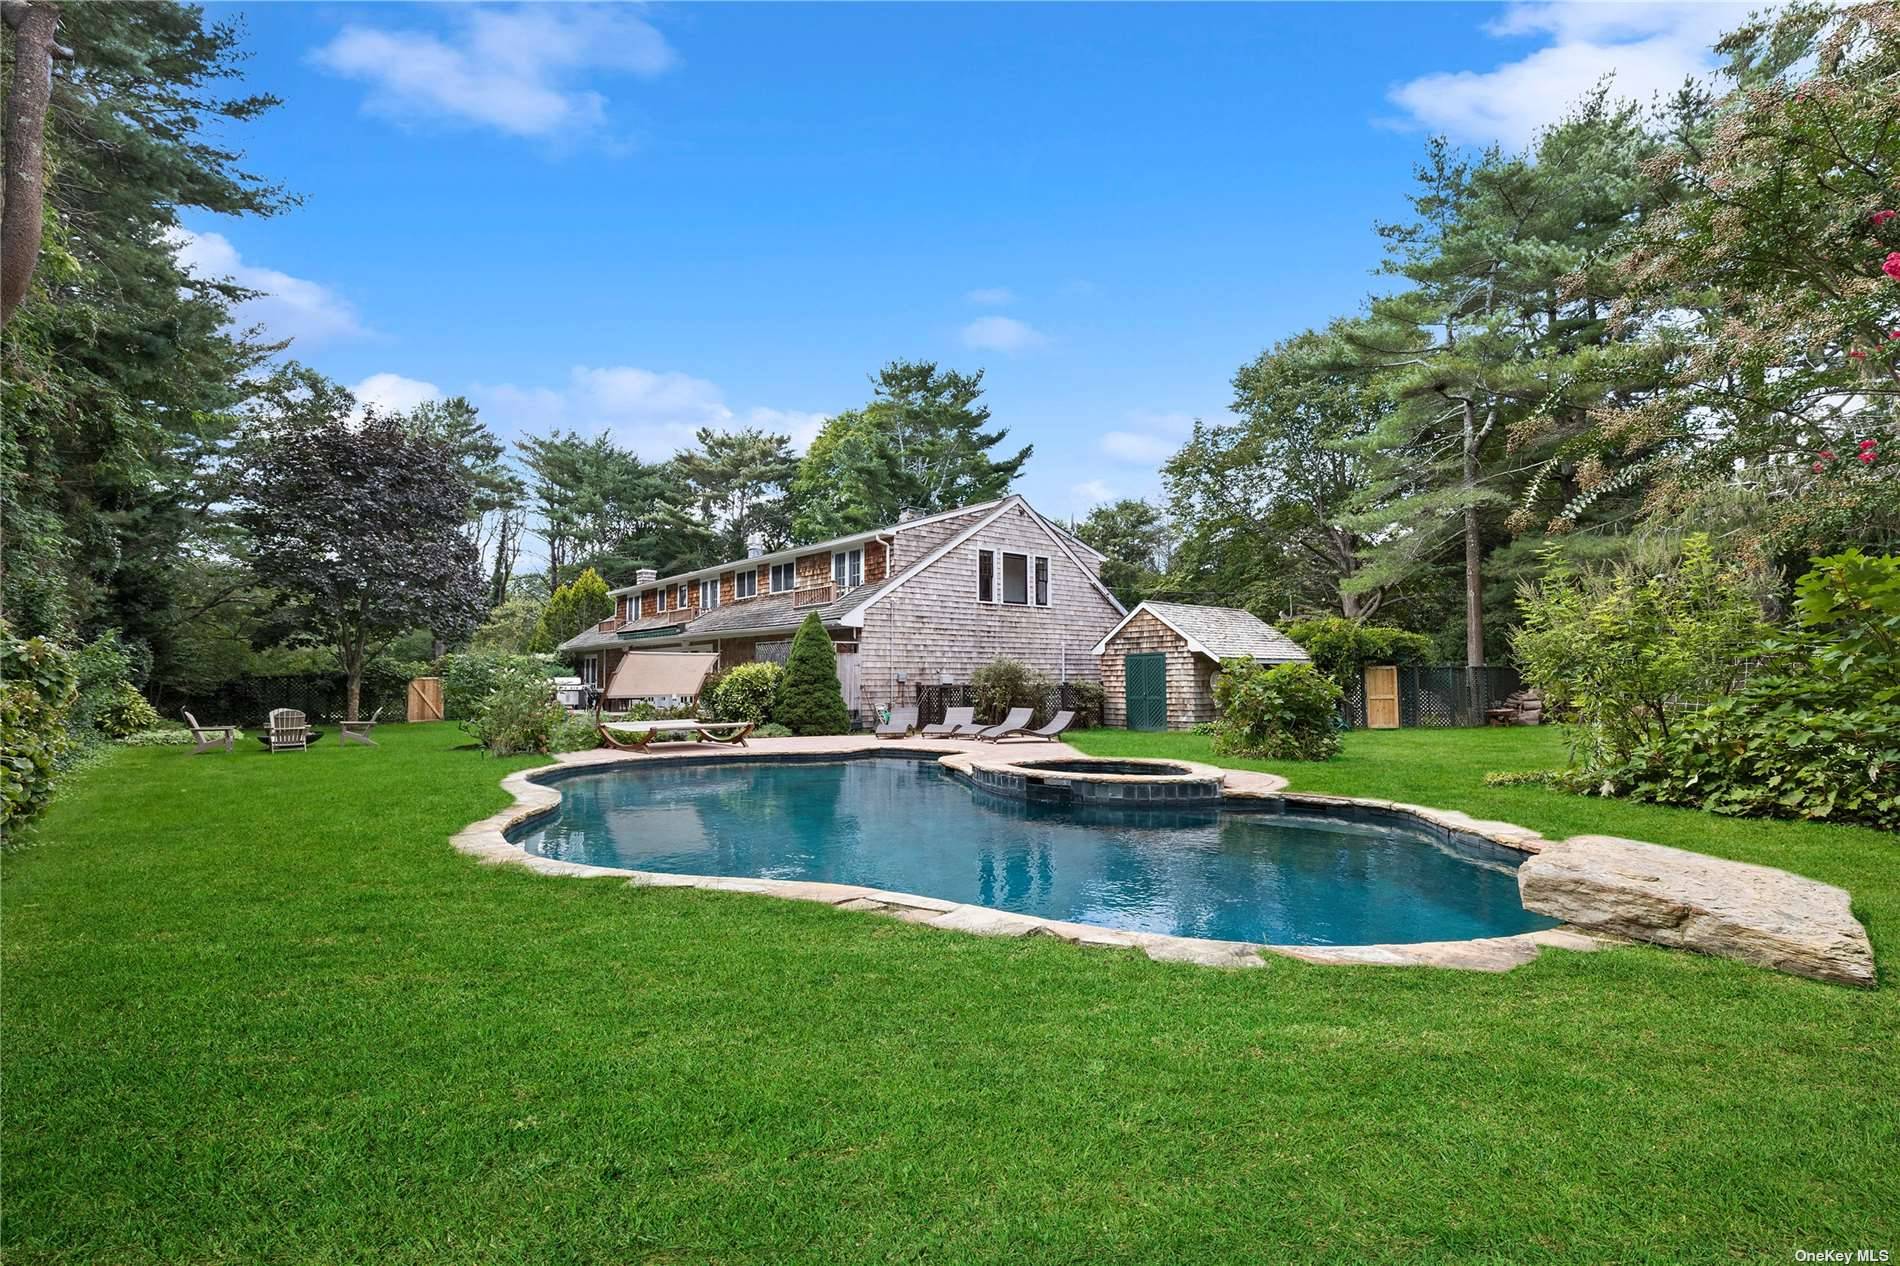 The privately secluded residence is located down a quiet country lane, just minutes from the newly transformed Westhampton Beach village and will absolutely blow you away.